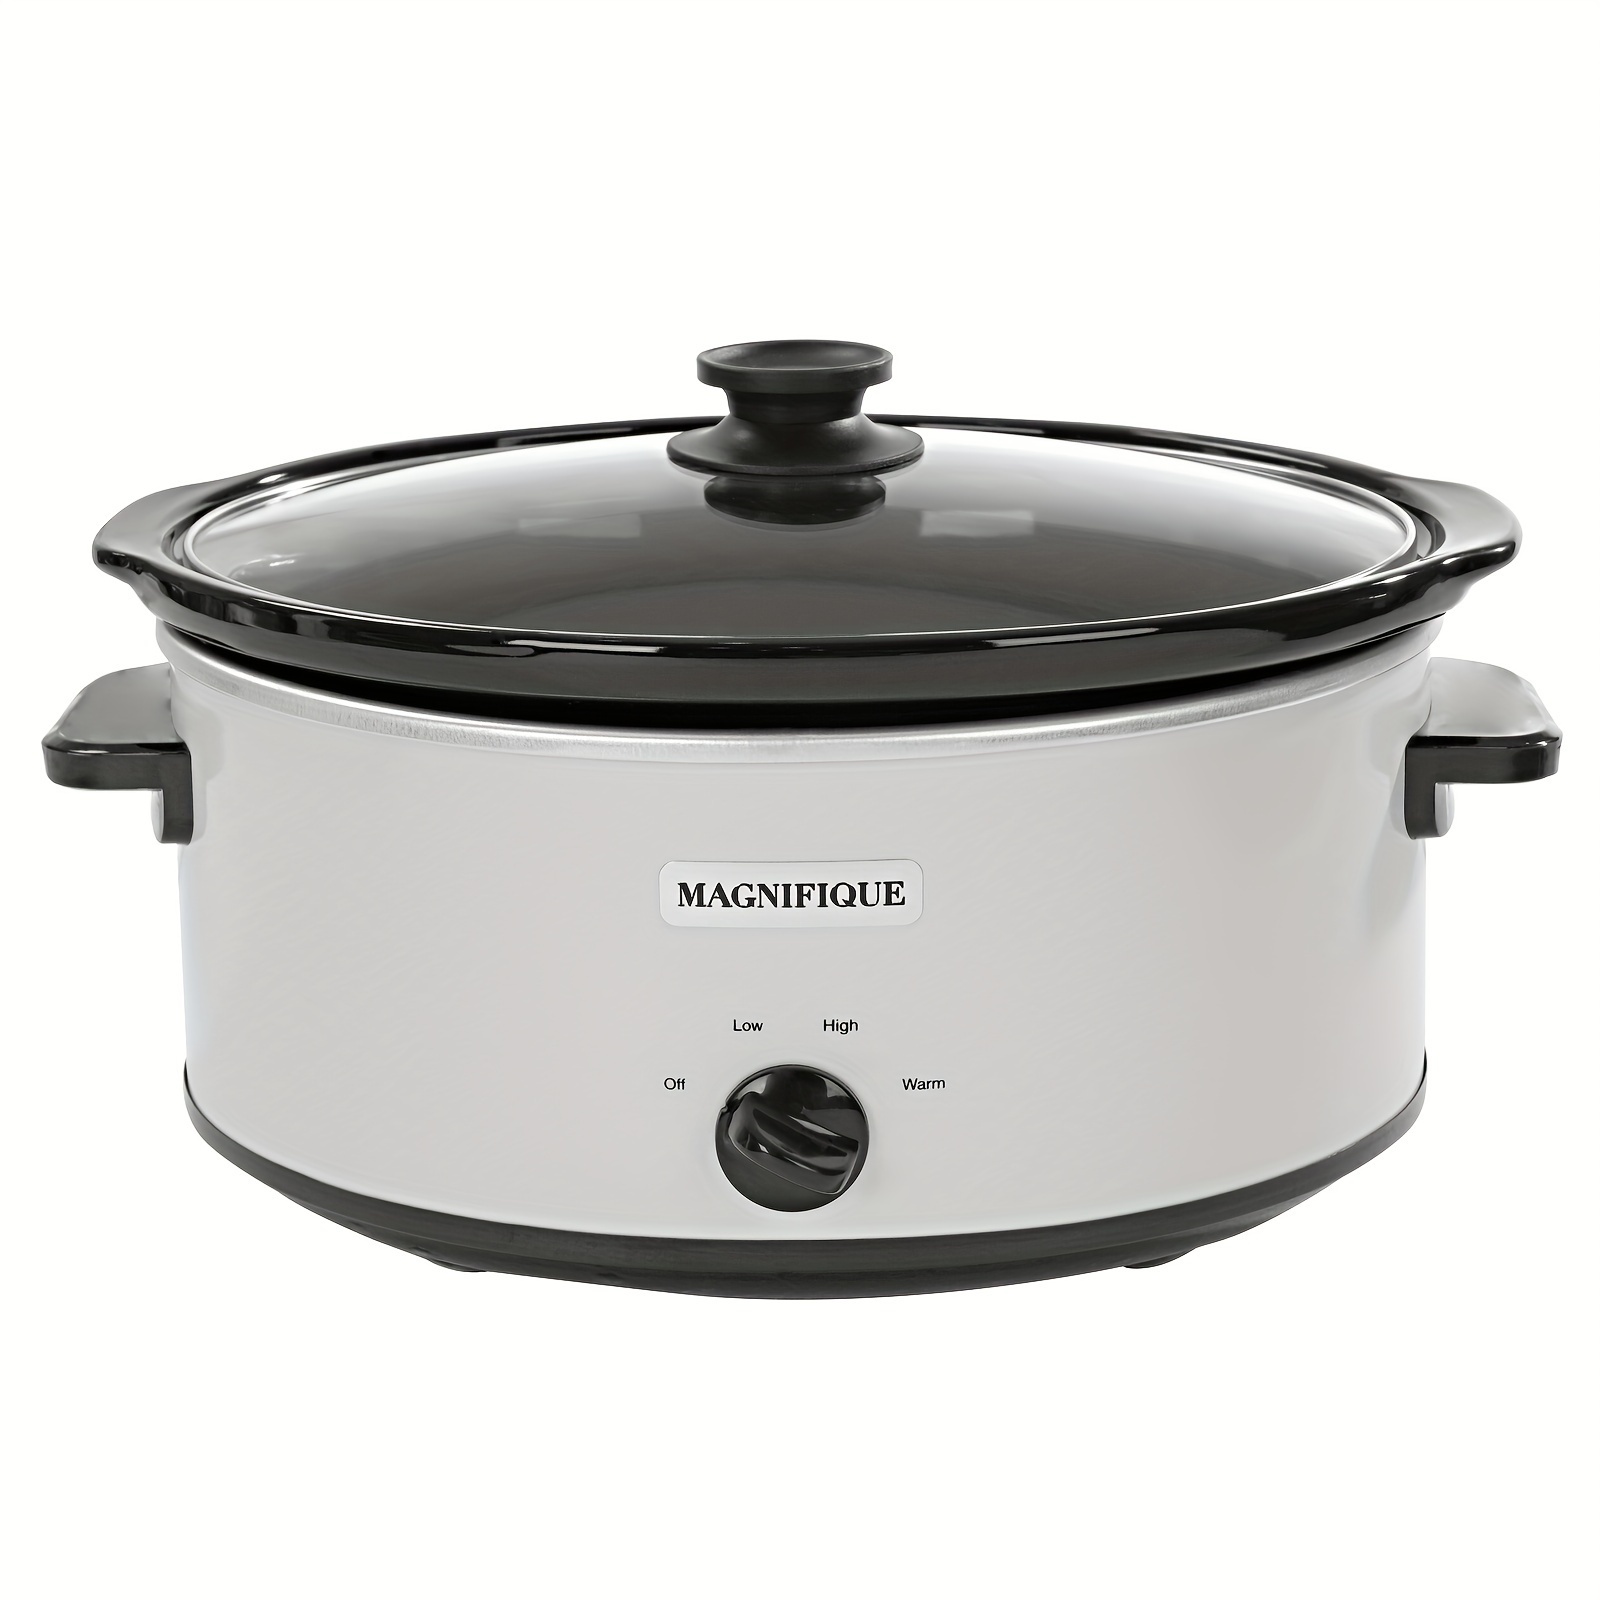 

8 Quart Slow Cooker Oval Manual Pot Food Warmer With 3 Cooking Settings, White Stainless Steel